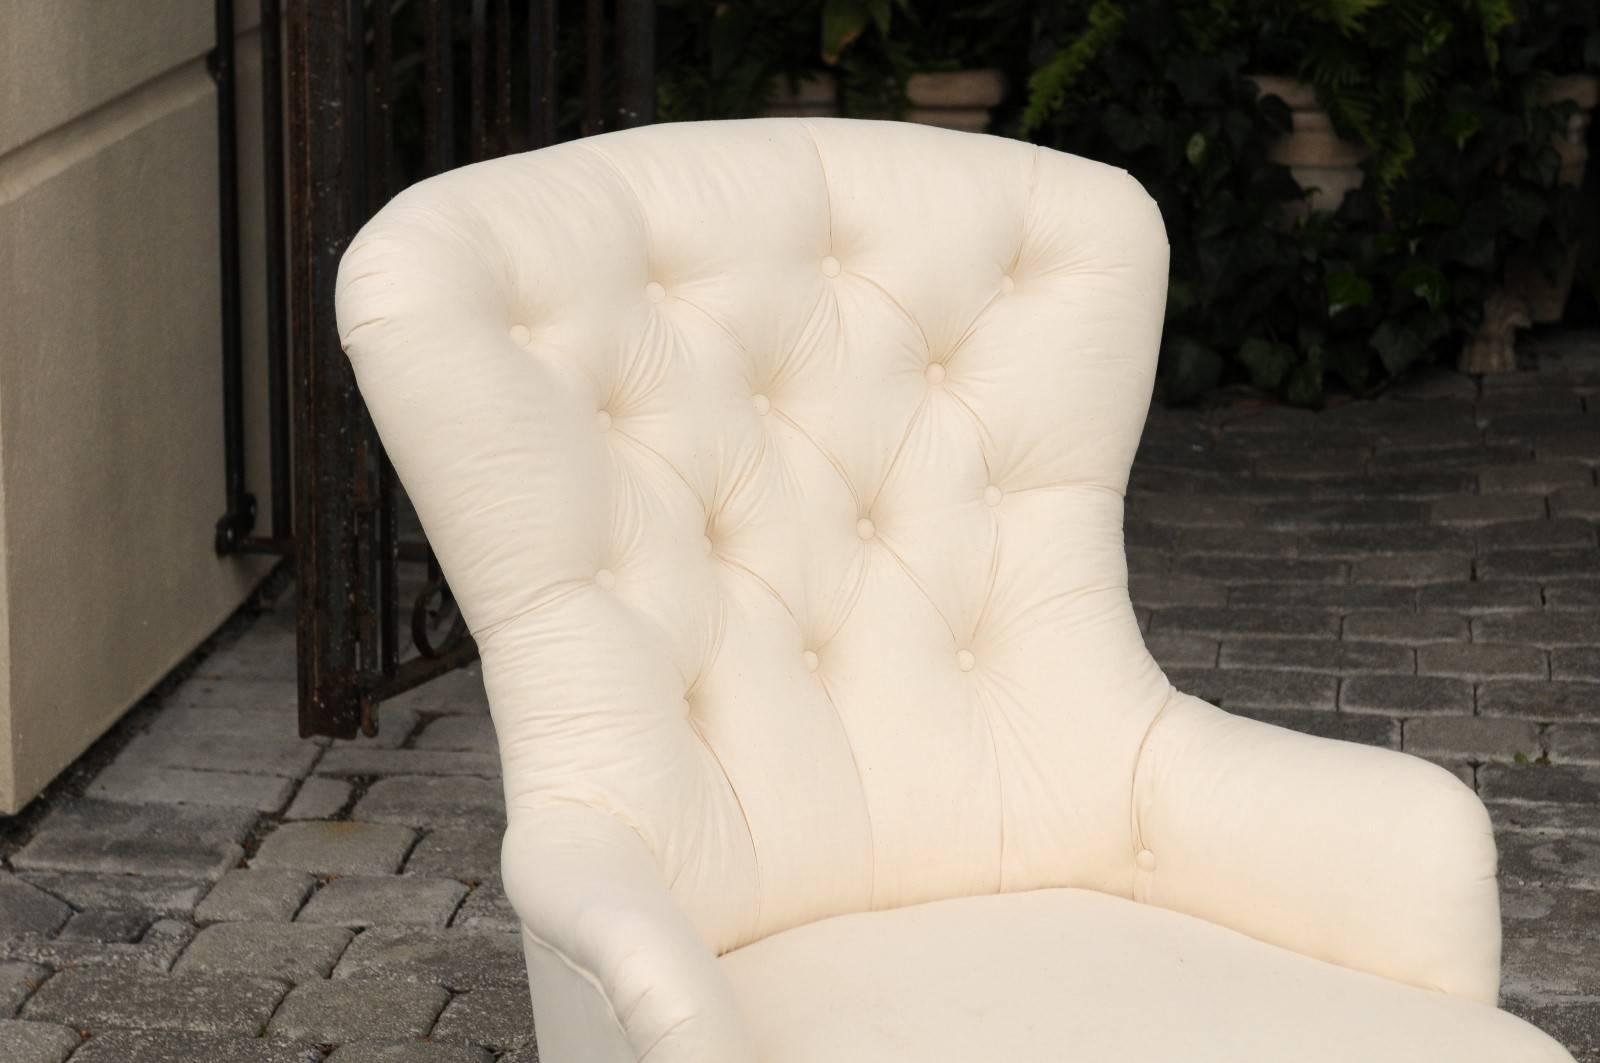 Upholstery English William IV Style Tufted Fanback Slipper Chair from the Late 19th Century